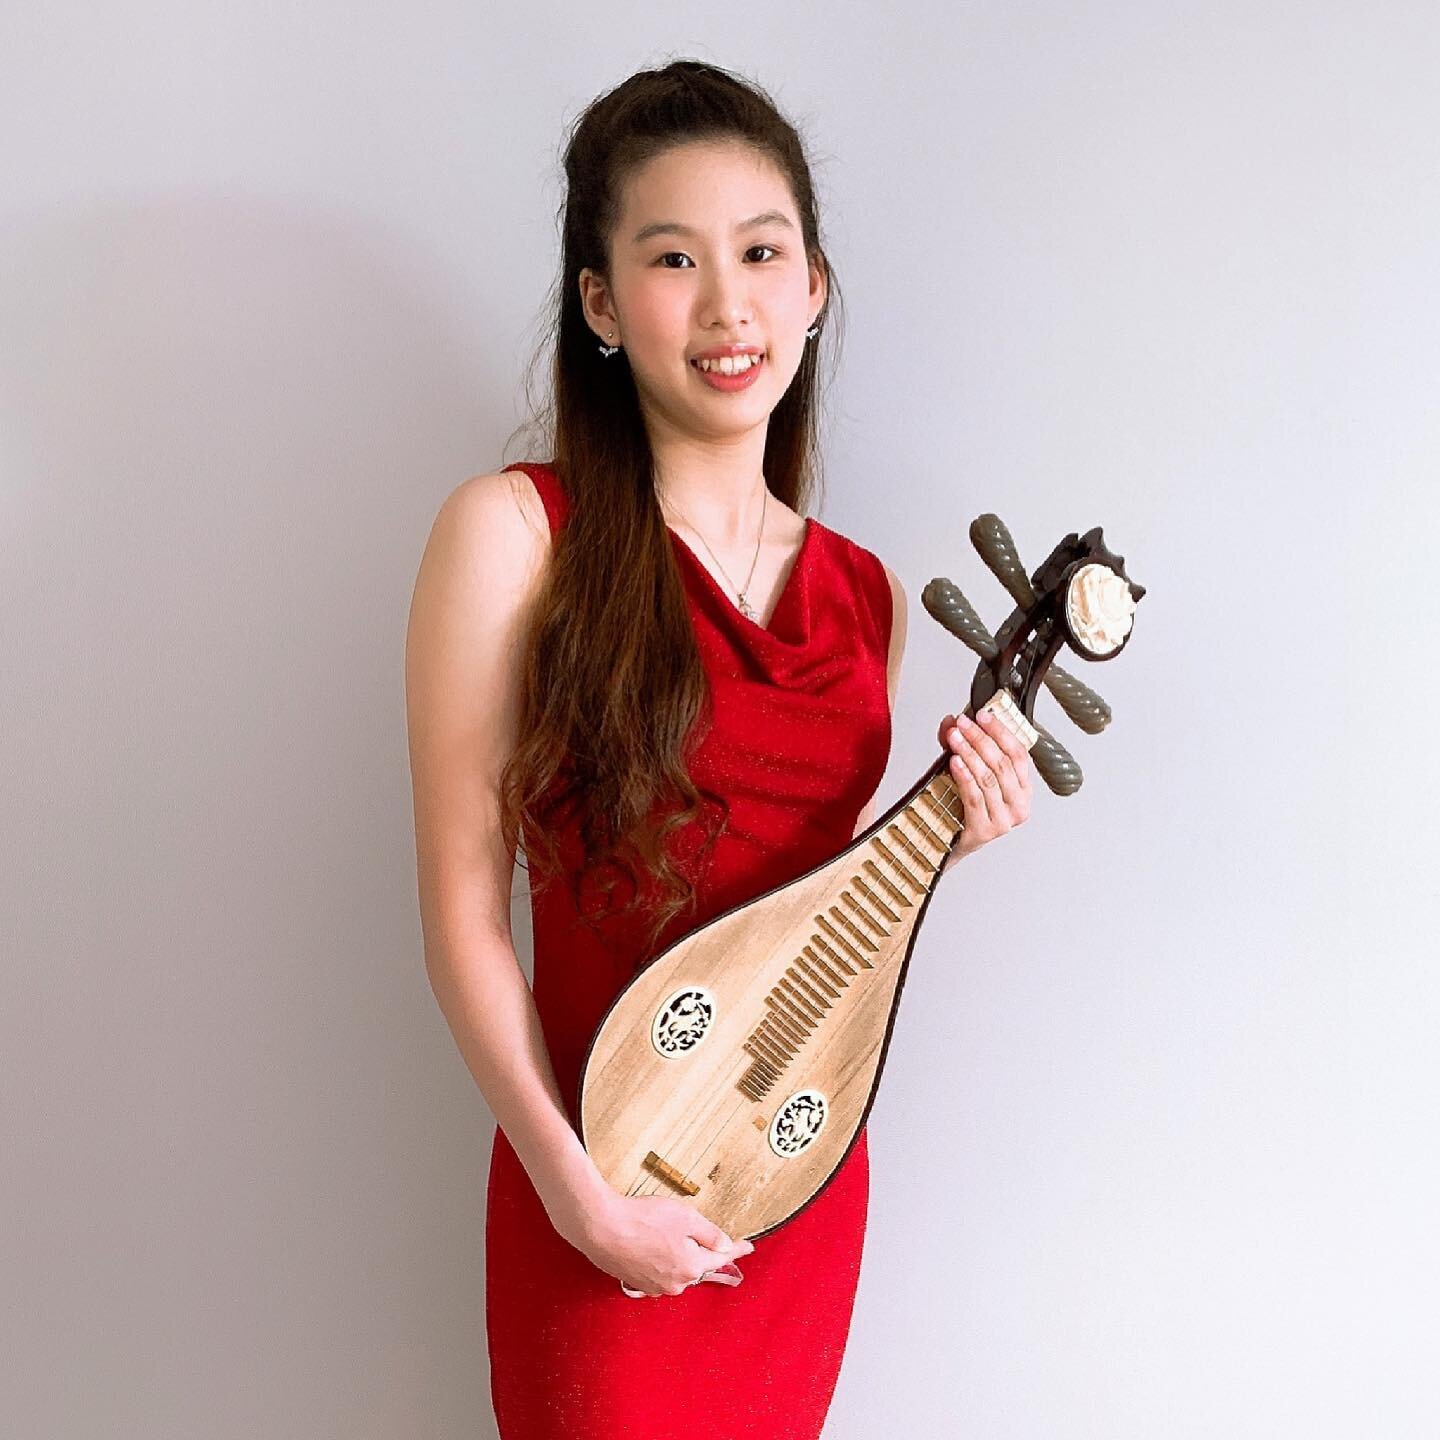 Hello everyone! My name is Elaine Fang. I have been playing my instrument 柳琴 (Liu Qin) since I was in elementary school. I would like to share what I love, my music and my instrument 柳琴 (Liu Qin) with as much people as I can. If you like my performan